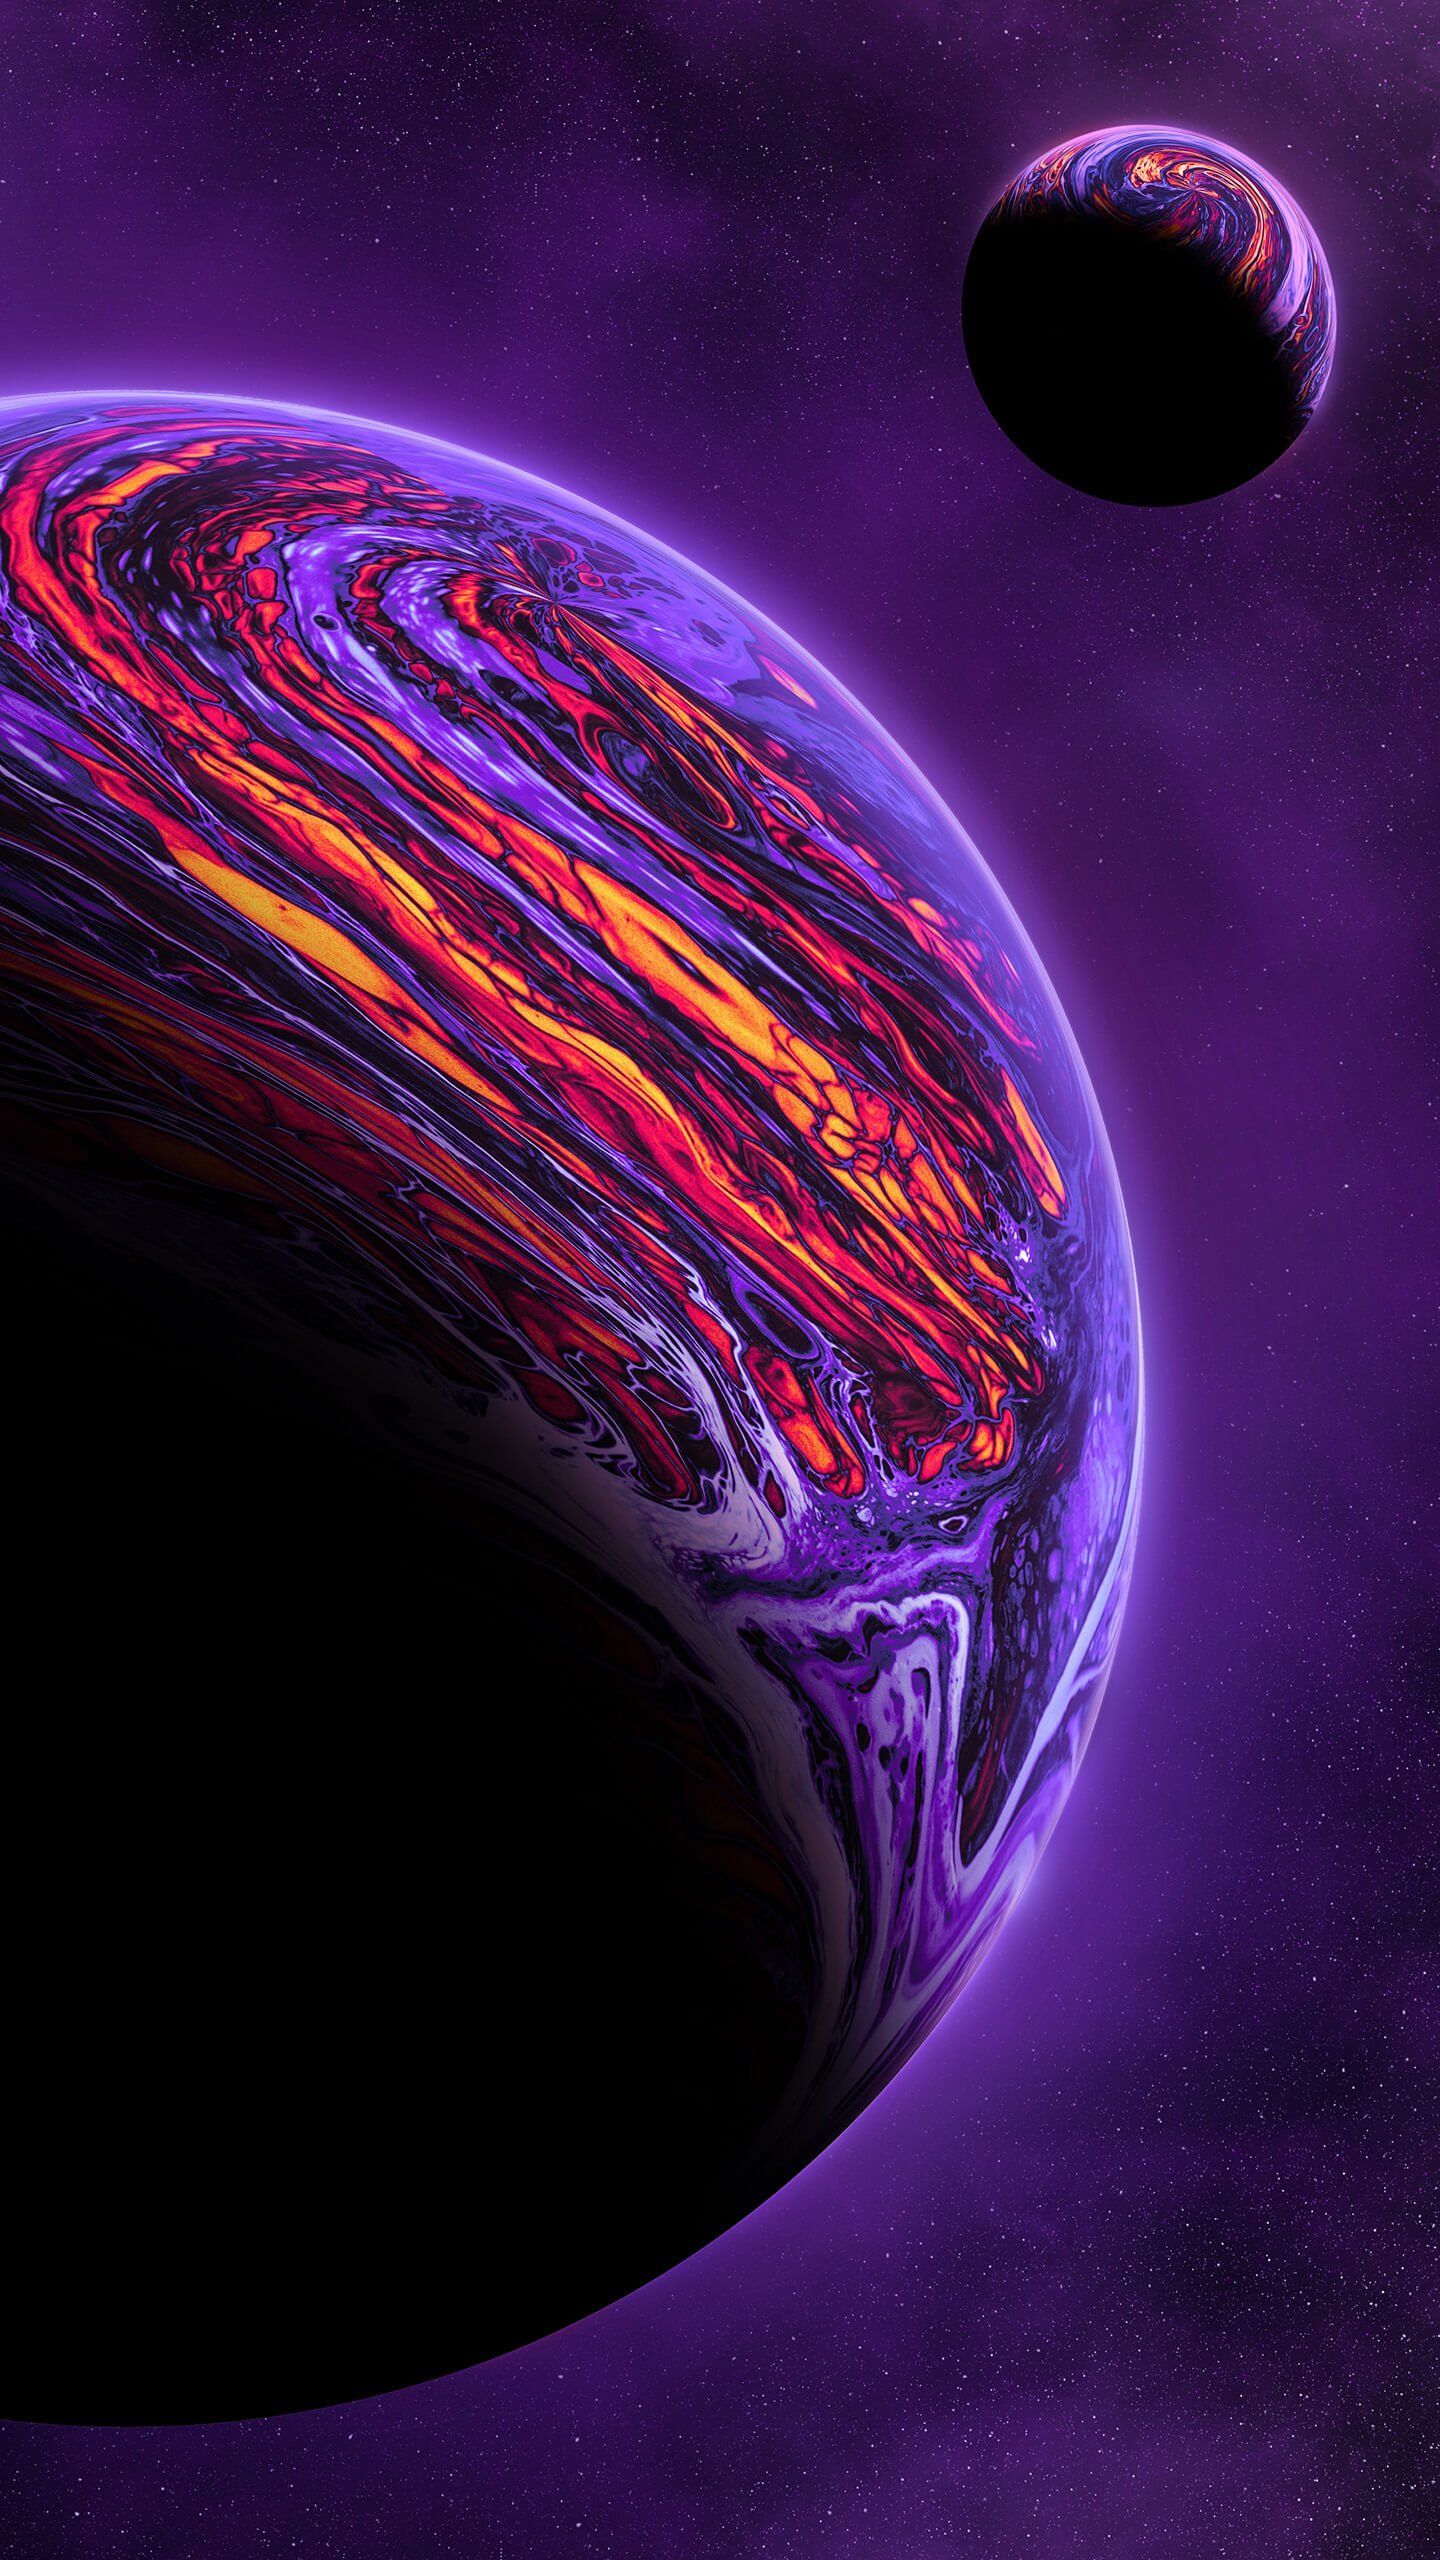 Space Planet Art Wallpaper  IPhone Wallpapers  iPhone Wallpapers